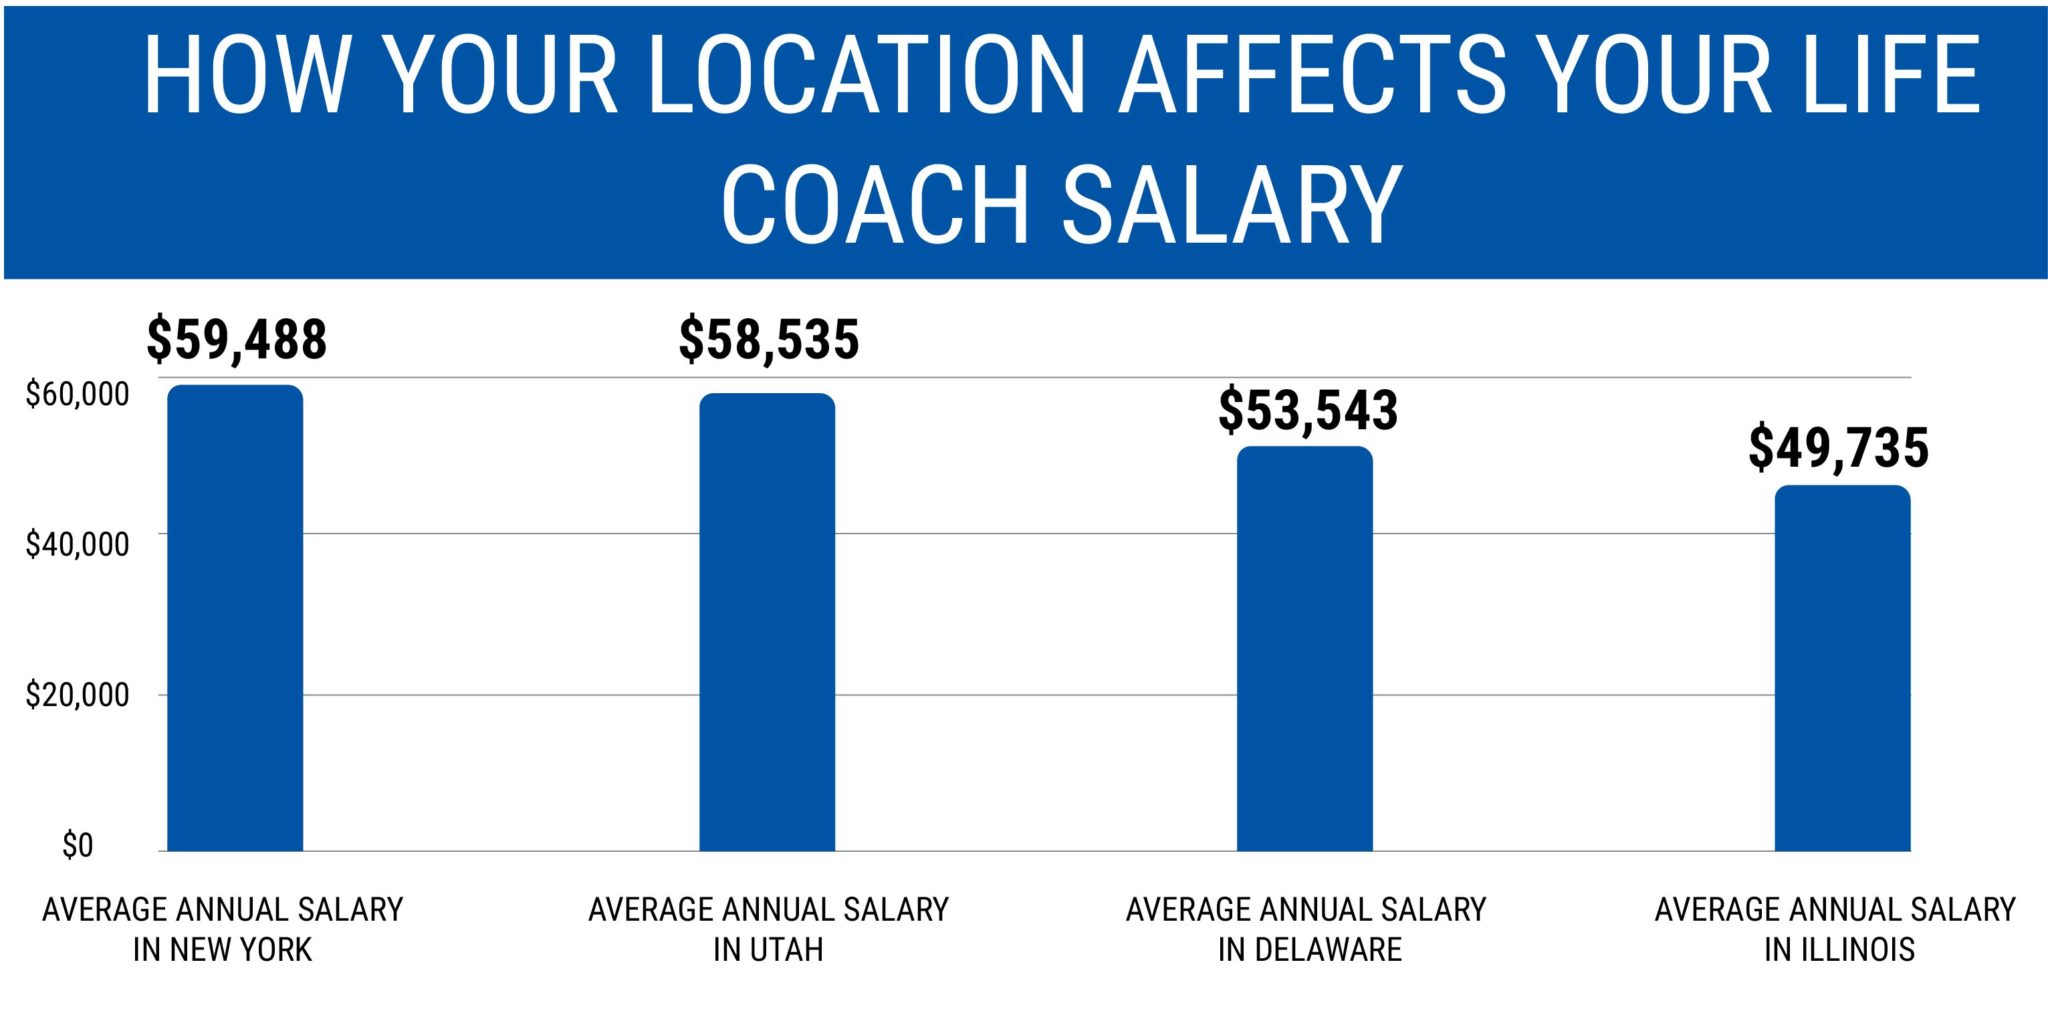 HOW YOUR LOCATION AFFECTS YOUR LIFE COACH SALARY